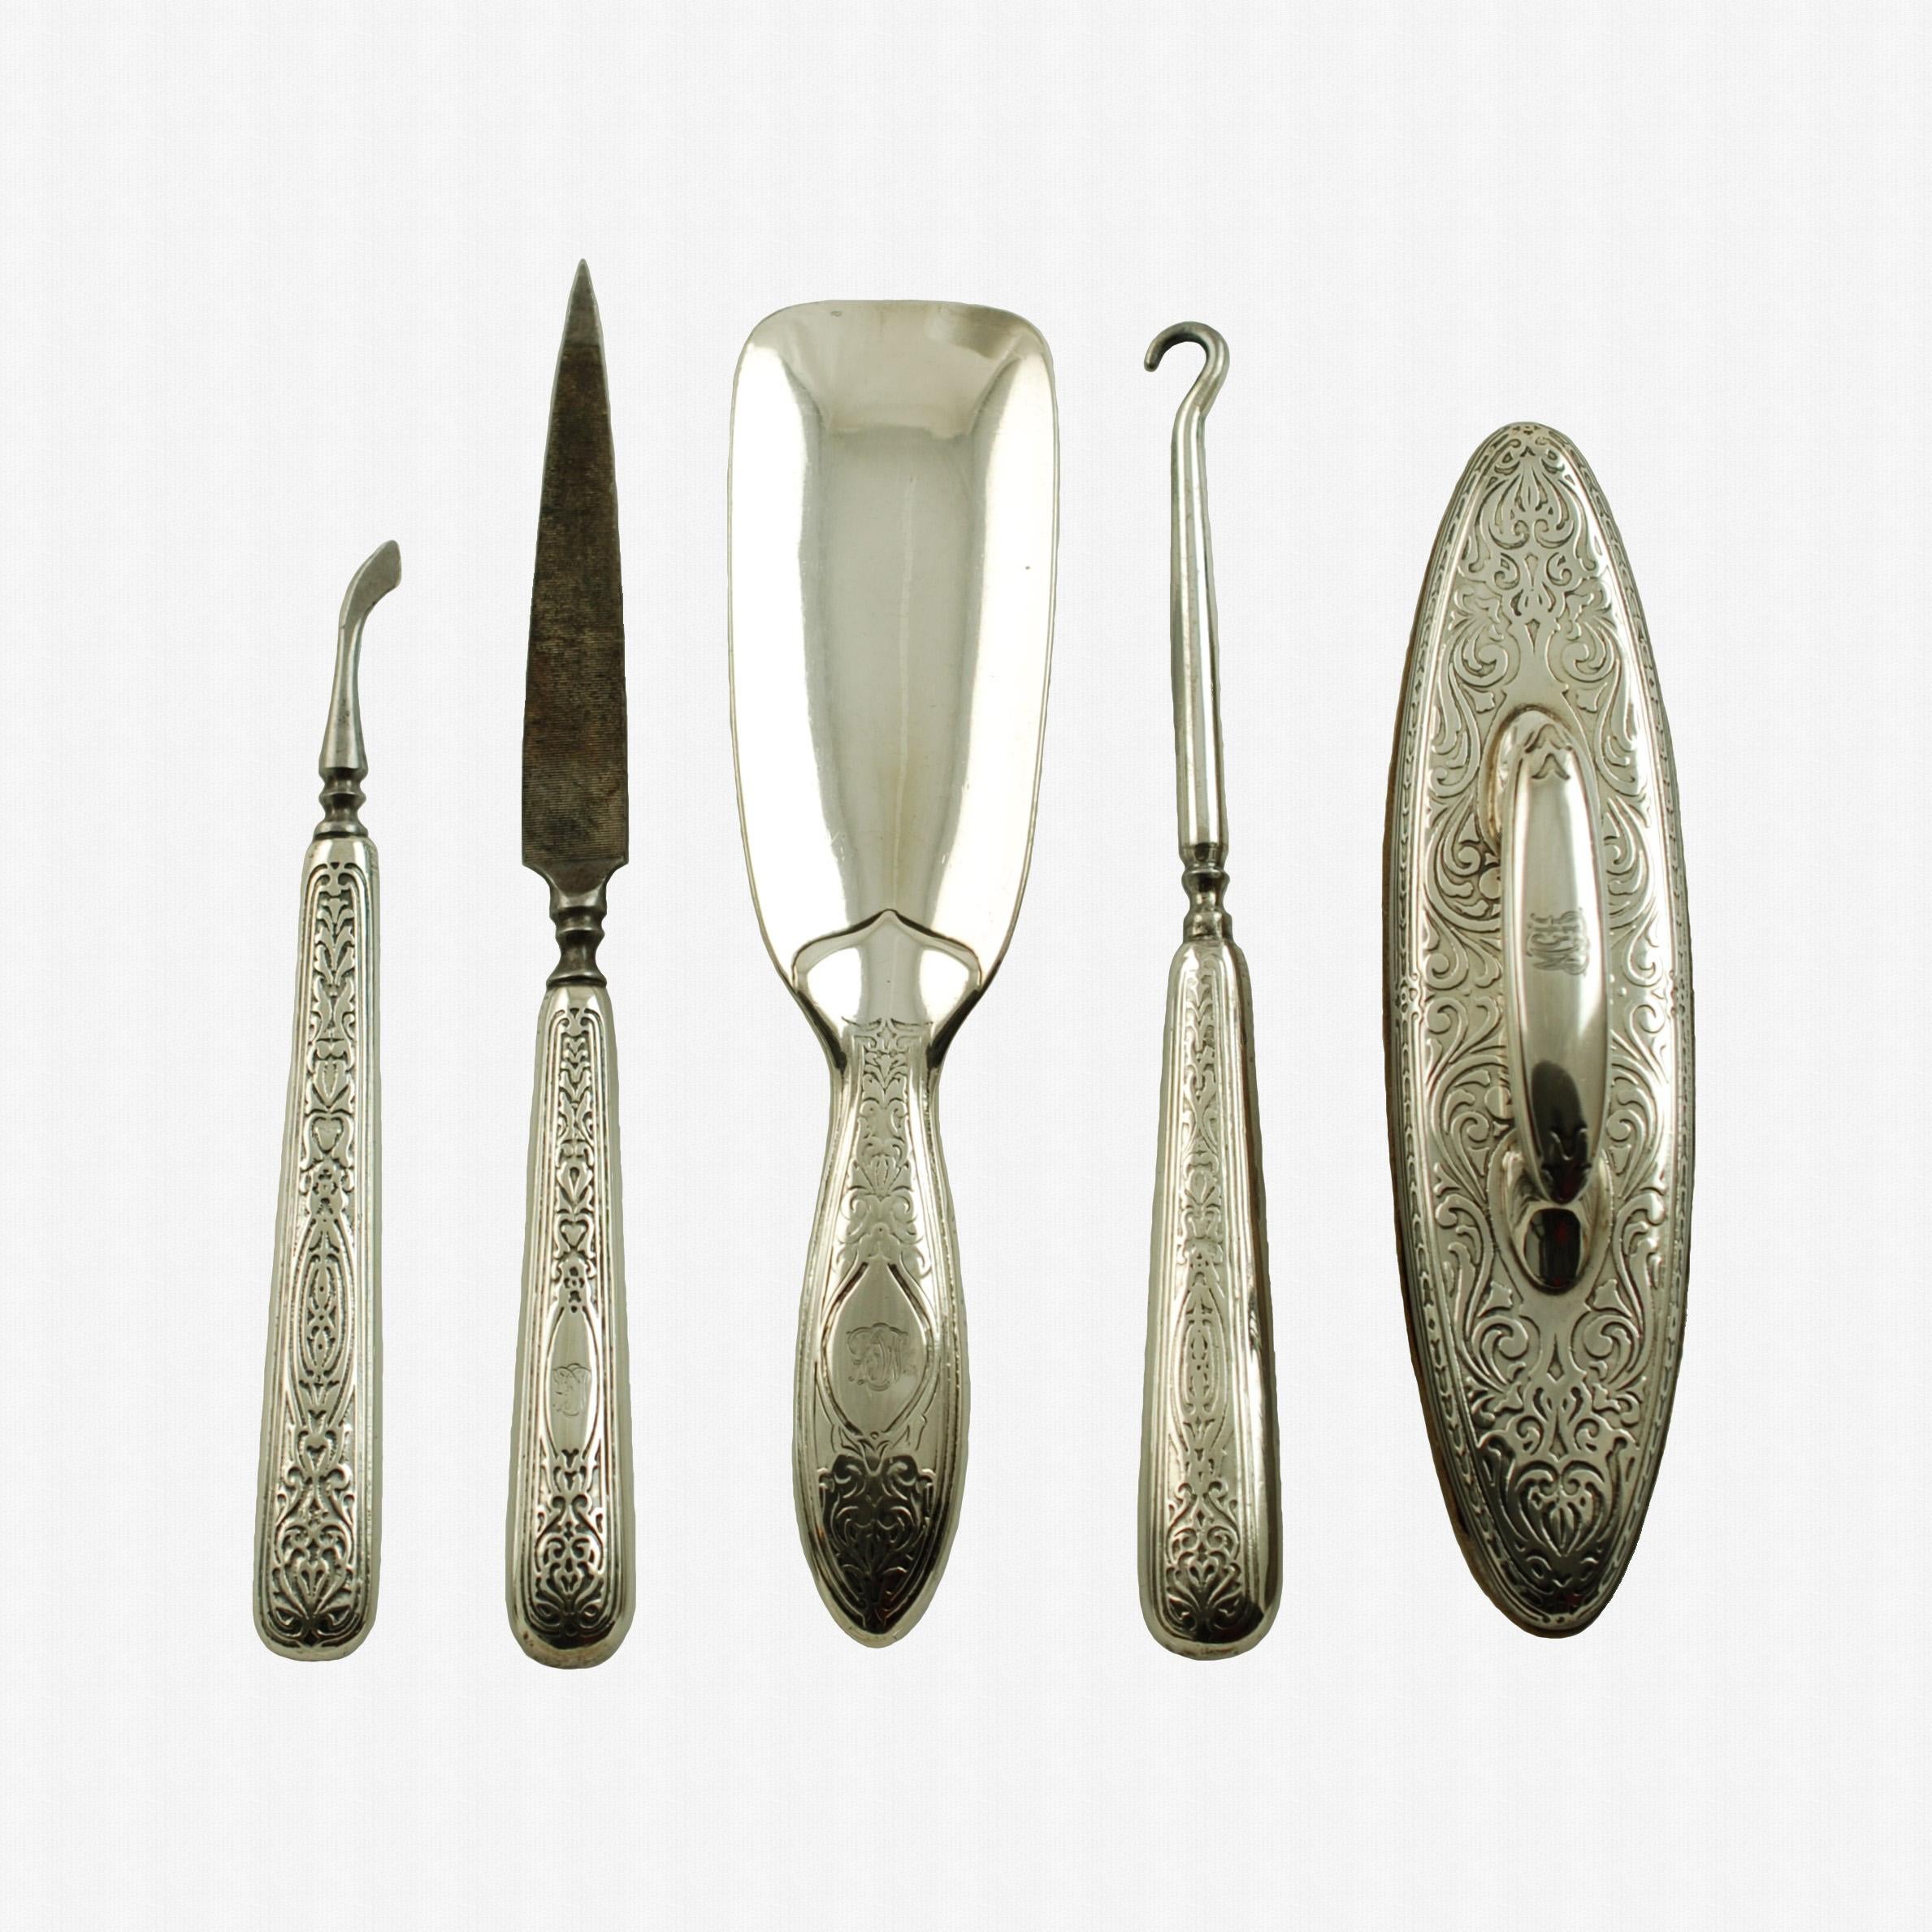 Edwardian Tiffany & Co. Sterling Silver 13-Piece Vanity Set In Good Condition For Sale In Cincinnati, OH